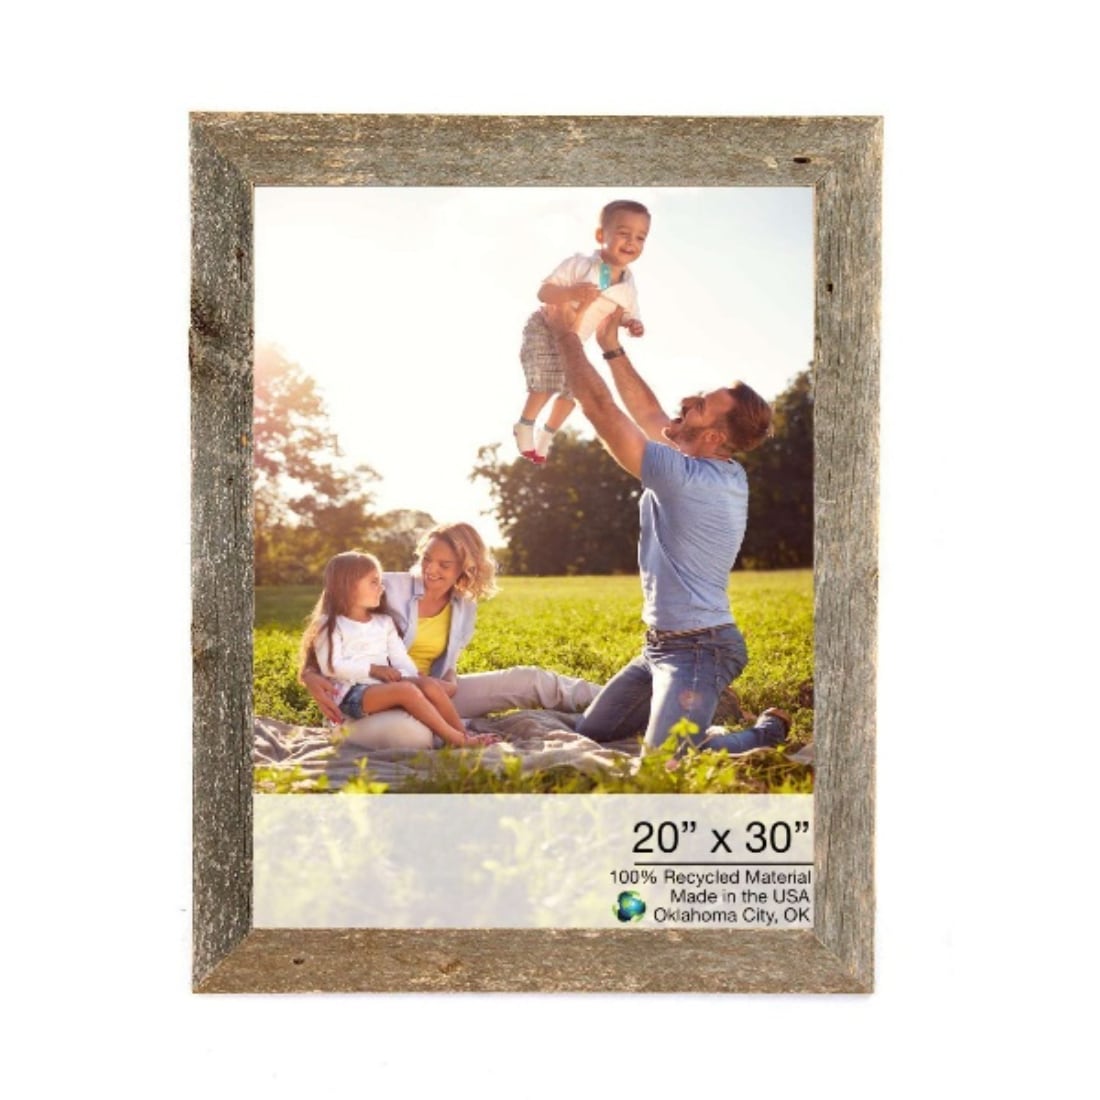 Seco 24 in. x 36 in. Silver Rounded Corners Snap Frame